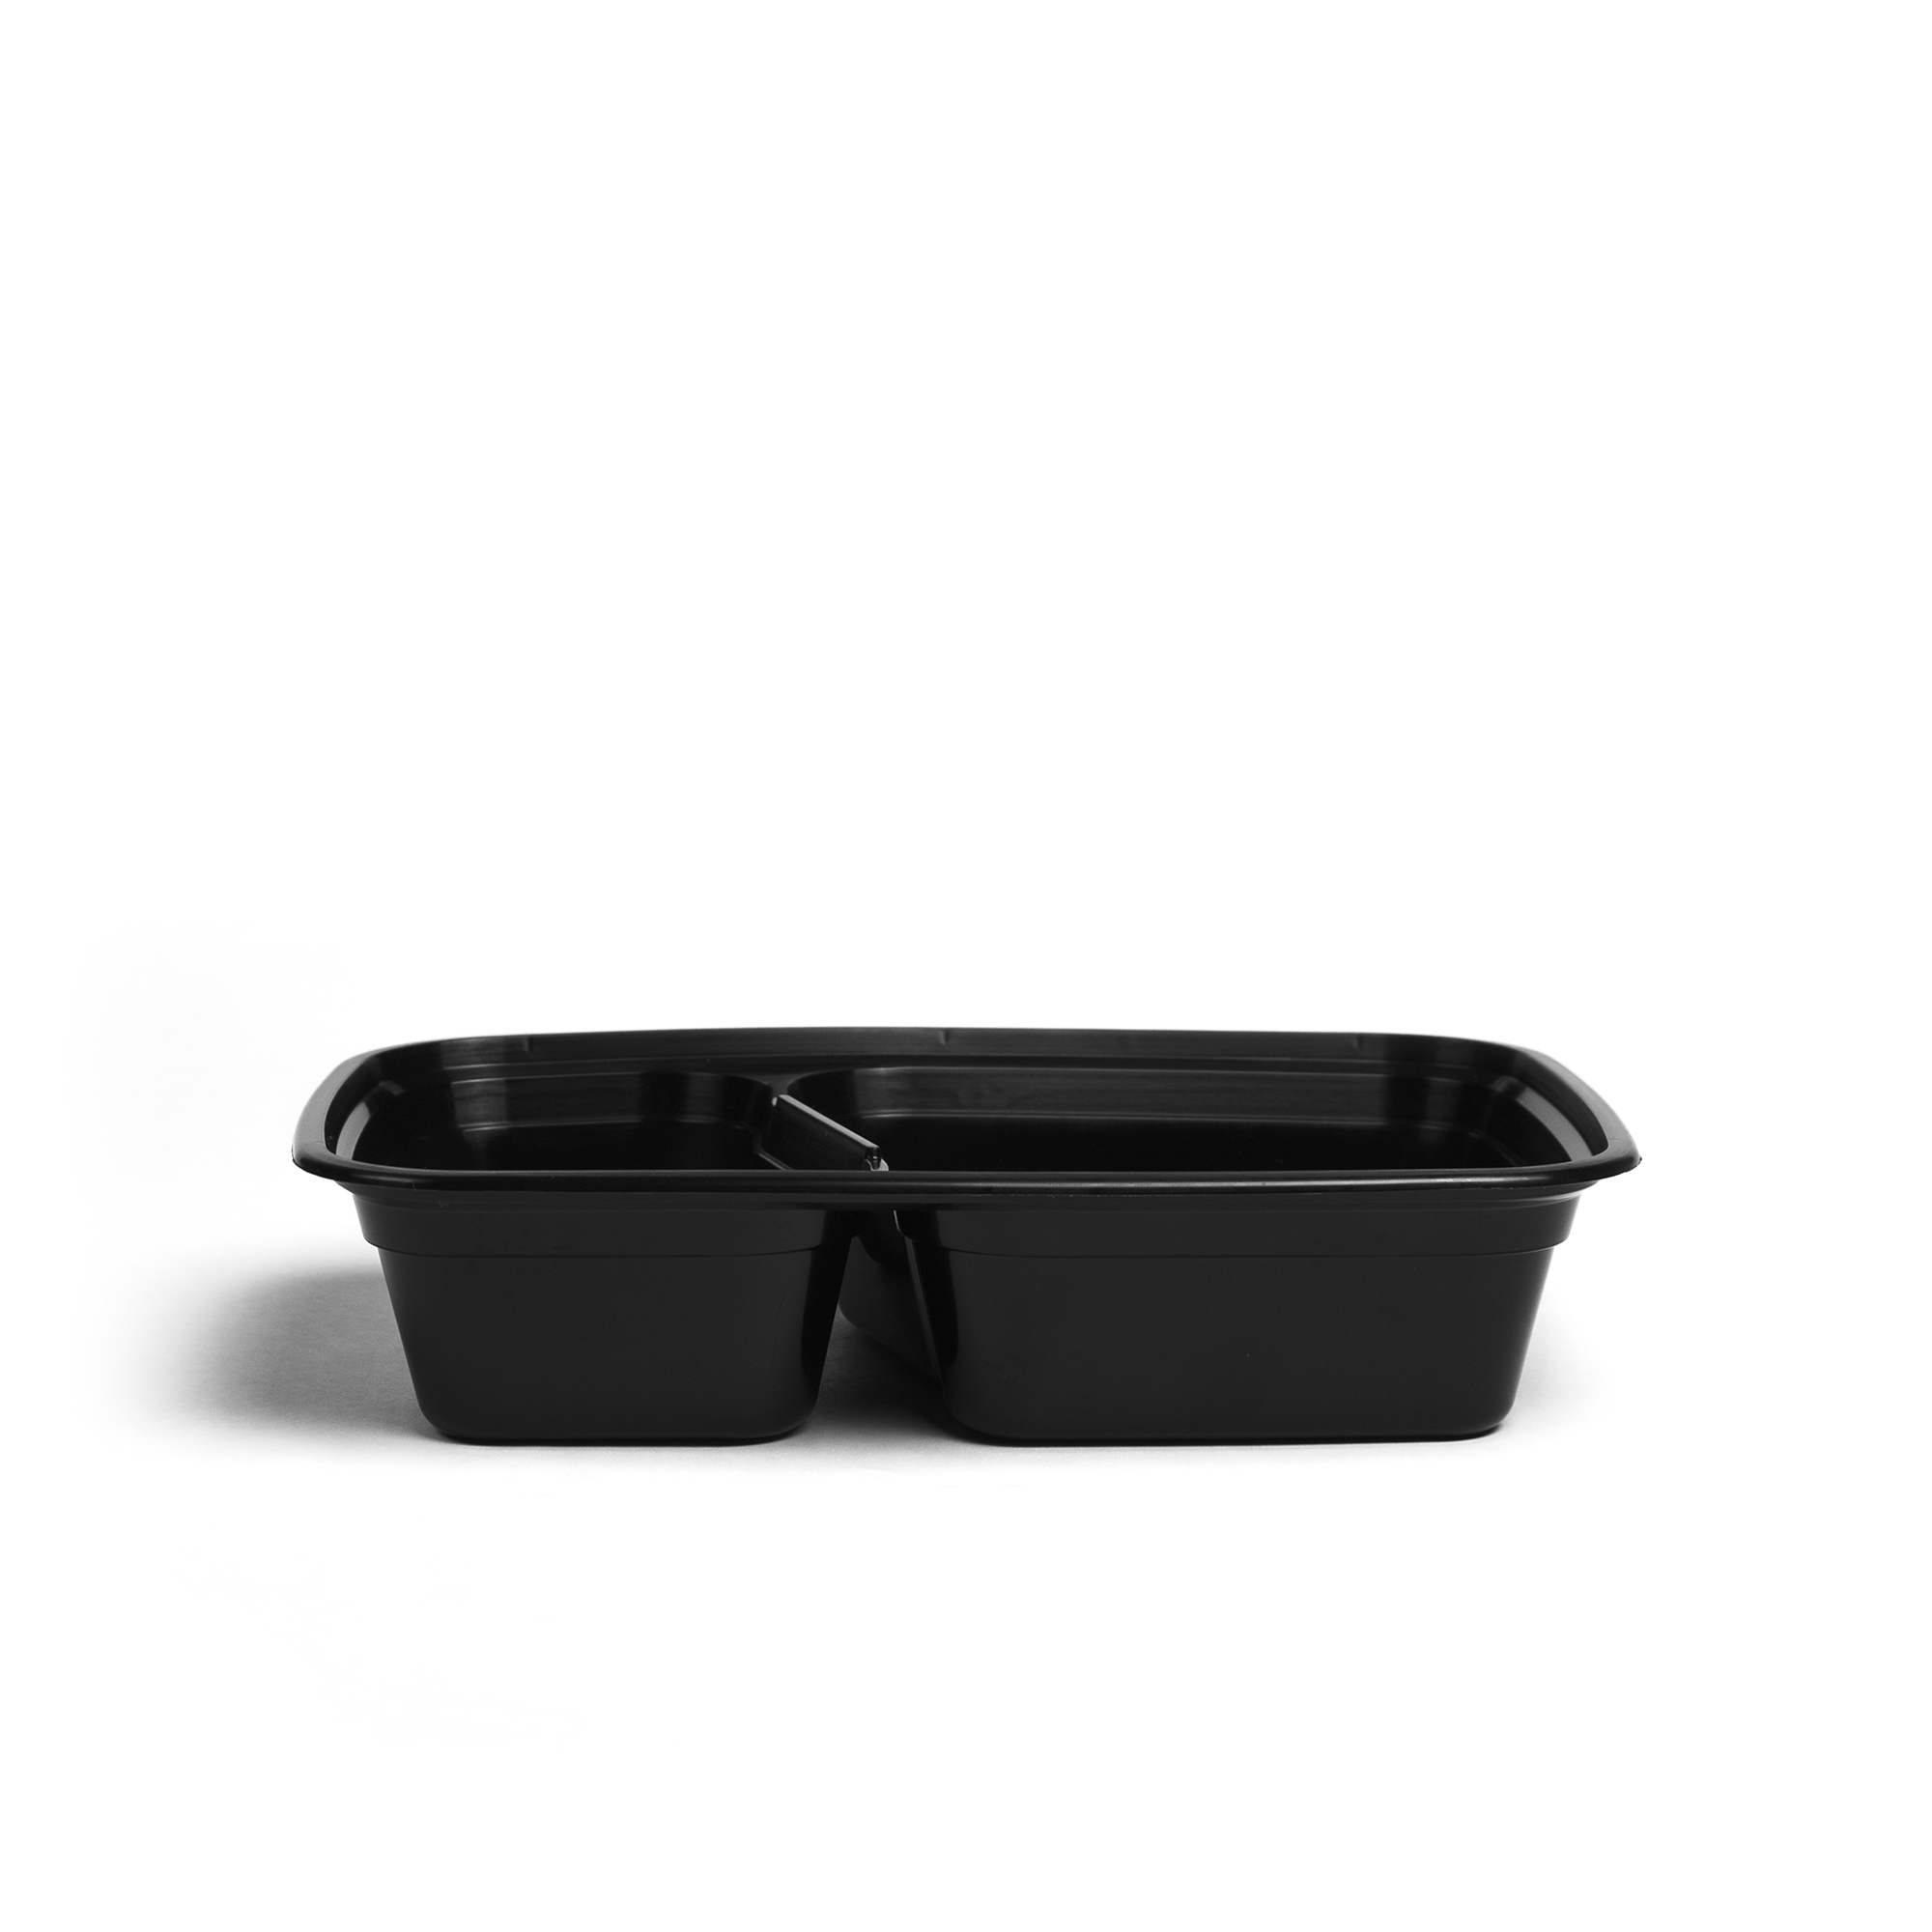 48 oz Round Take-out Container - ePackageSupply